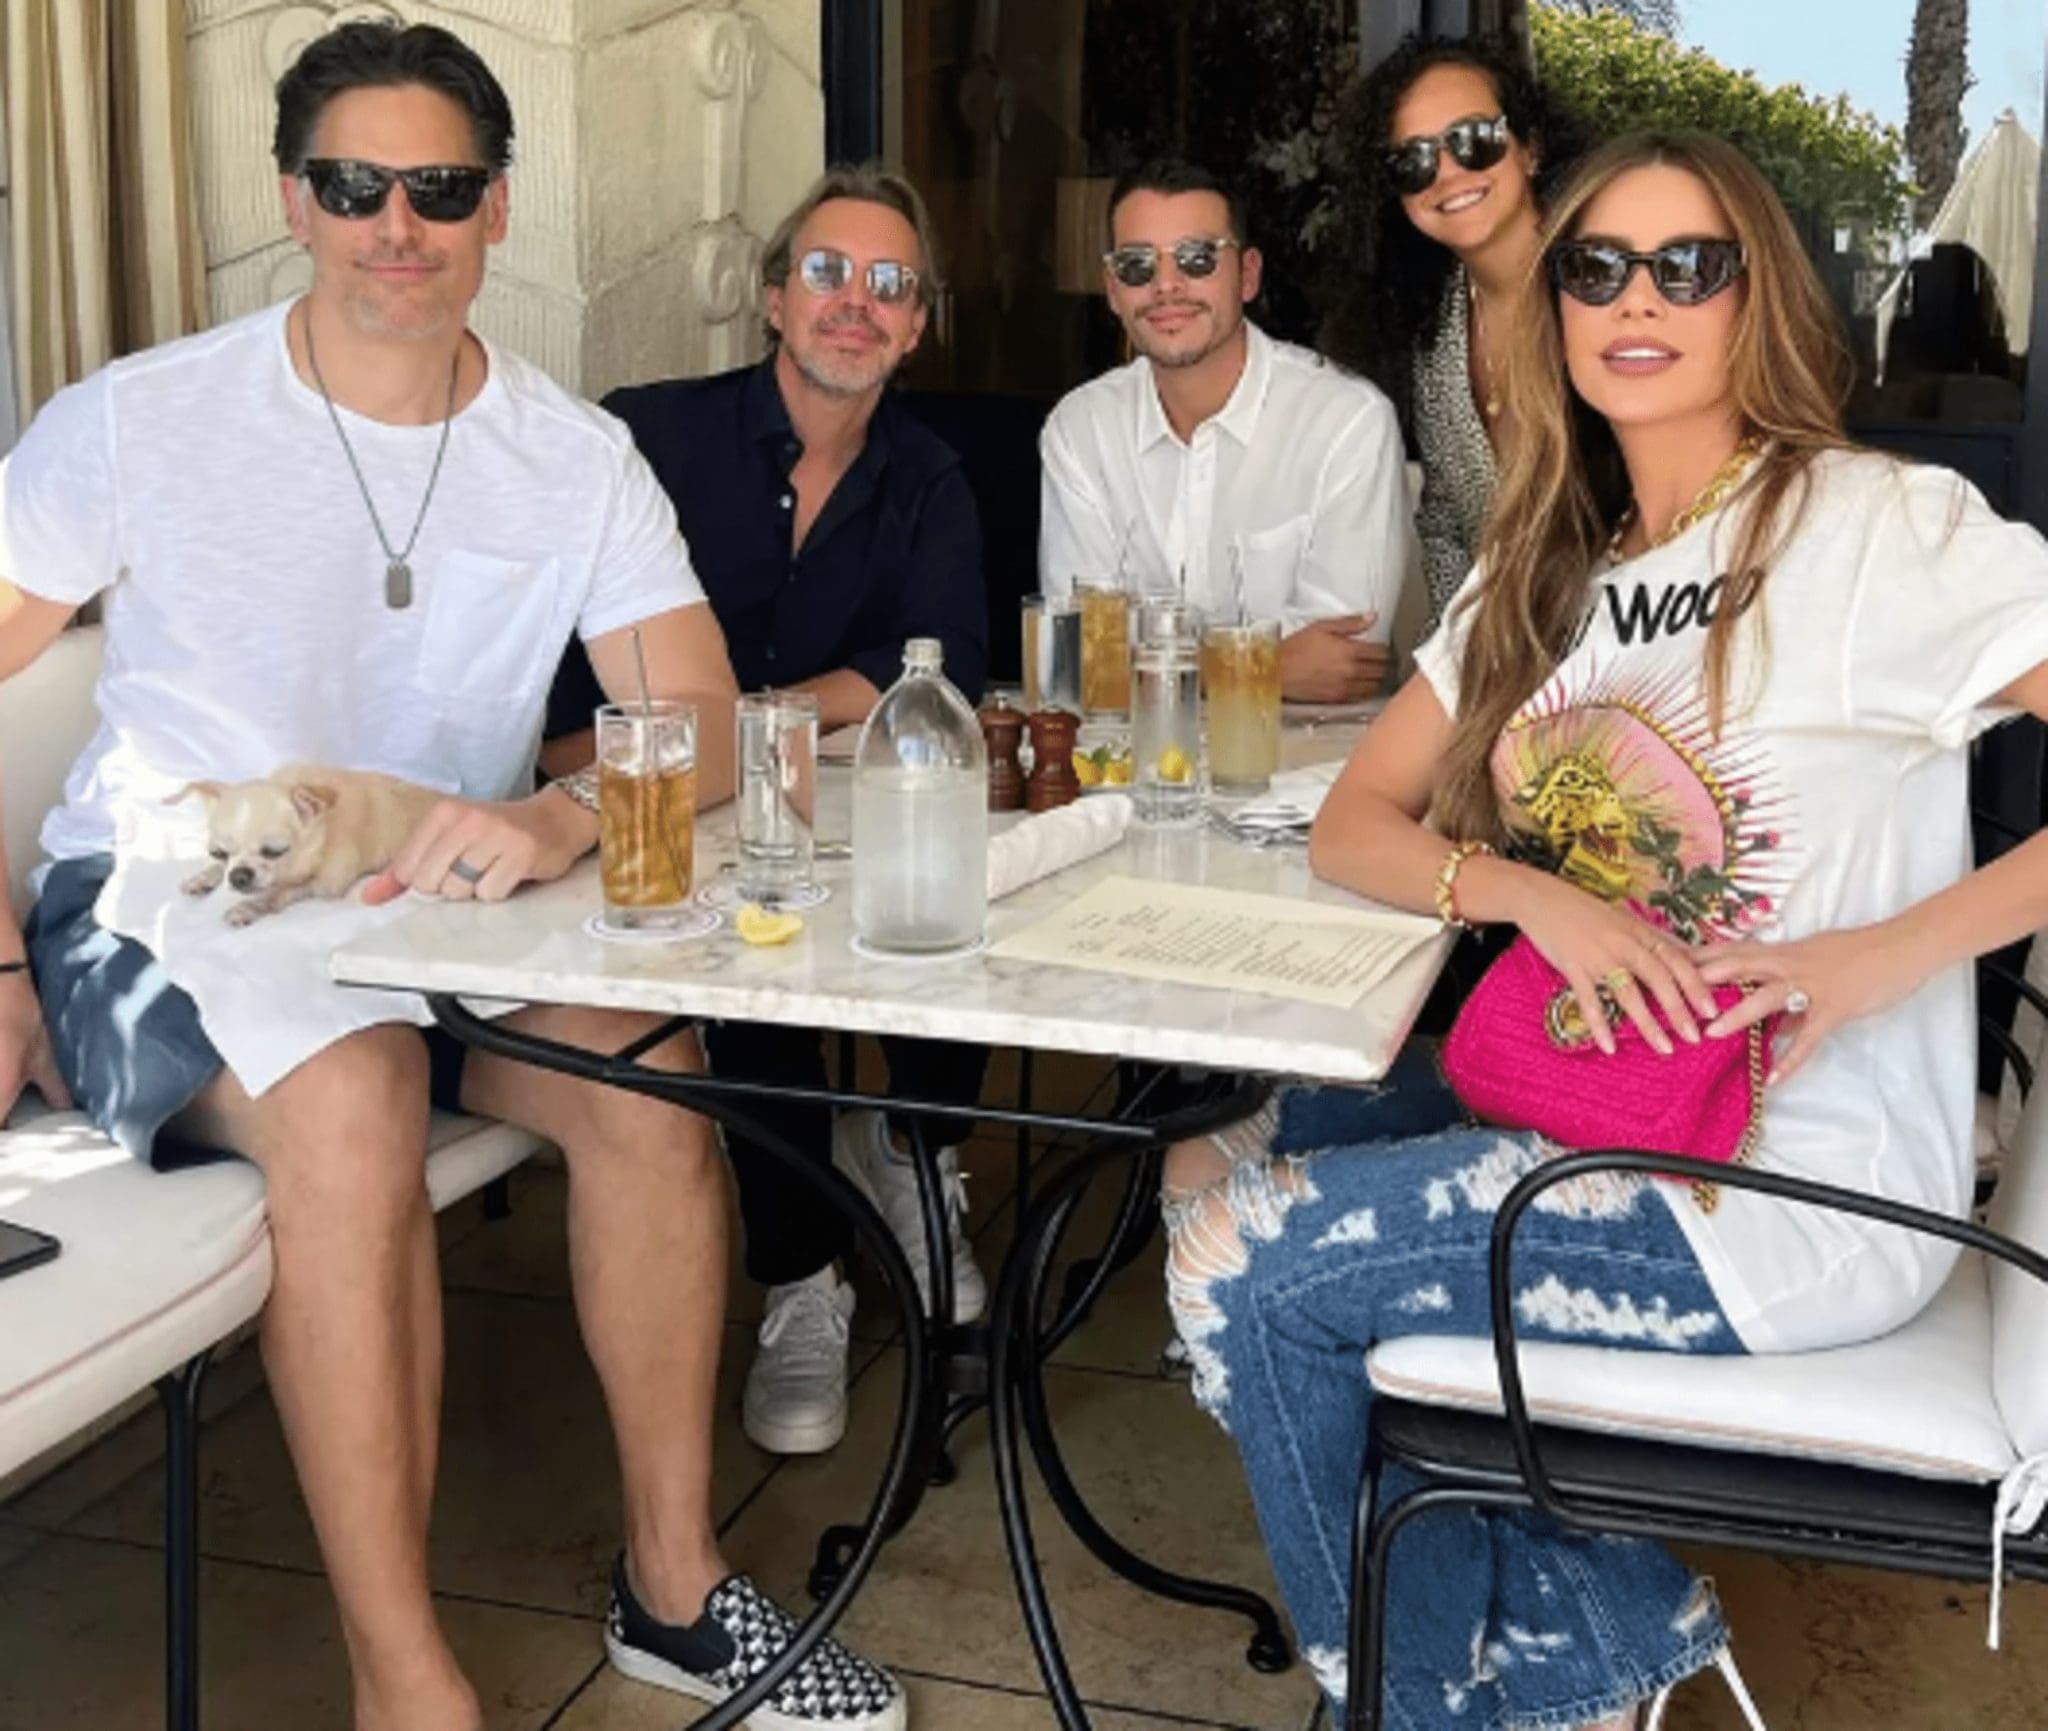 The Birthday Celebrations For Sofia Vergara's Son Manolo, Who Turned 31 Years Old, Were Attended By The Entire Family